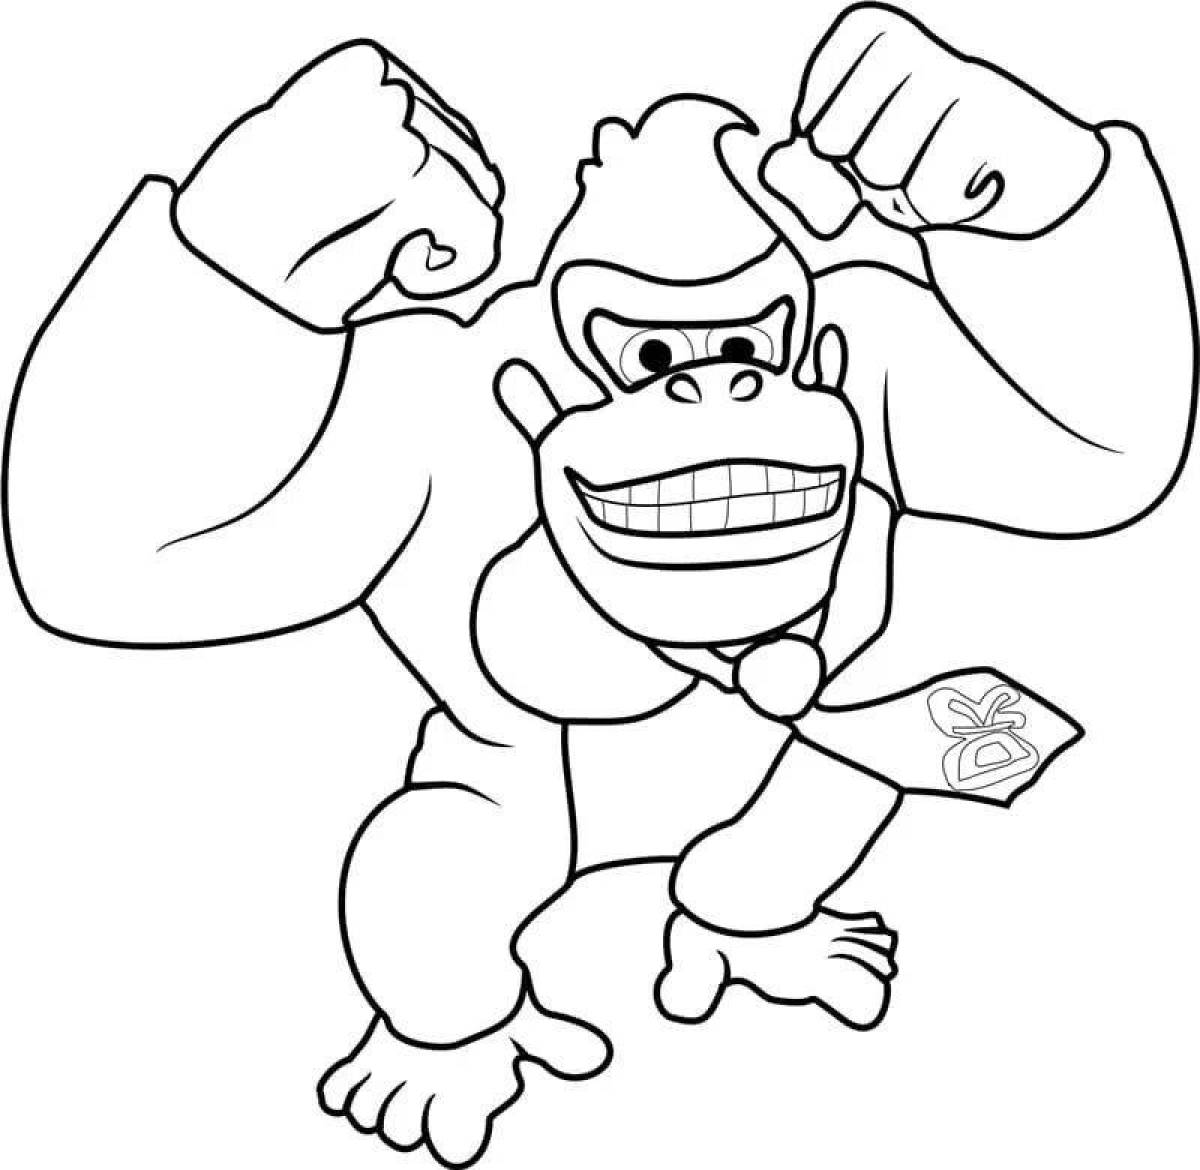 Awesome kong coloring page